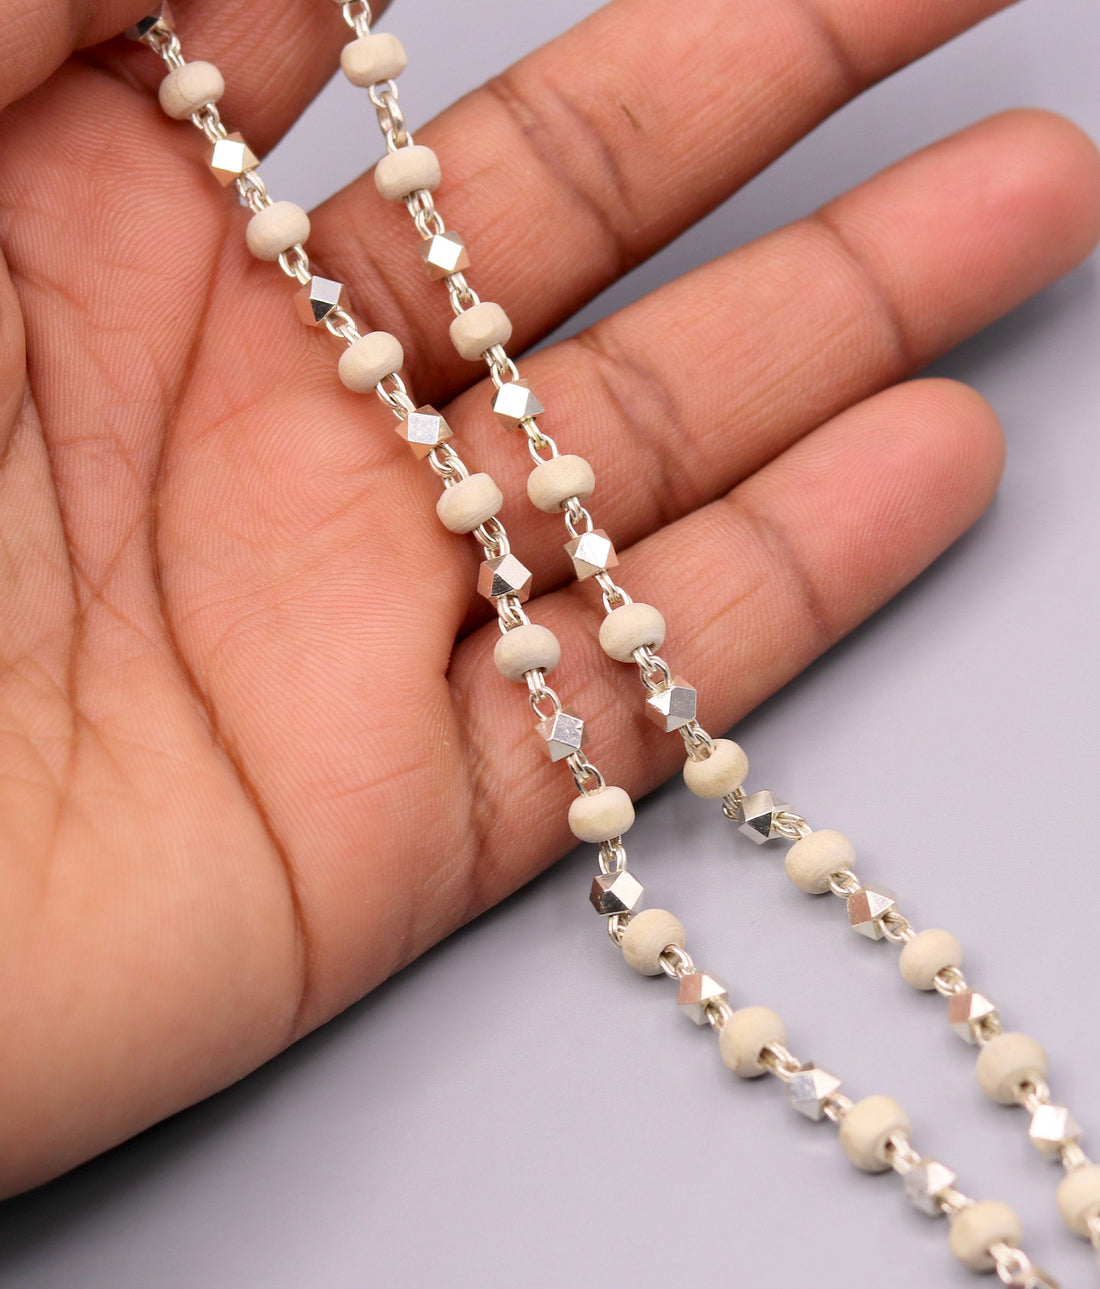 925 Silver handcrafted Basil rosary beads with silverbeads necklace chain tulsi mala use in Ayurveda for feel protected and focused ch19 - TRIBAL ORNAMENTS